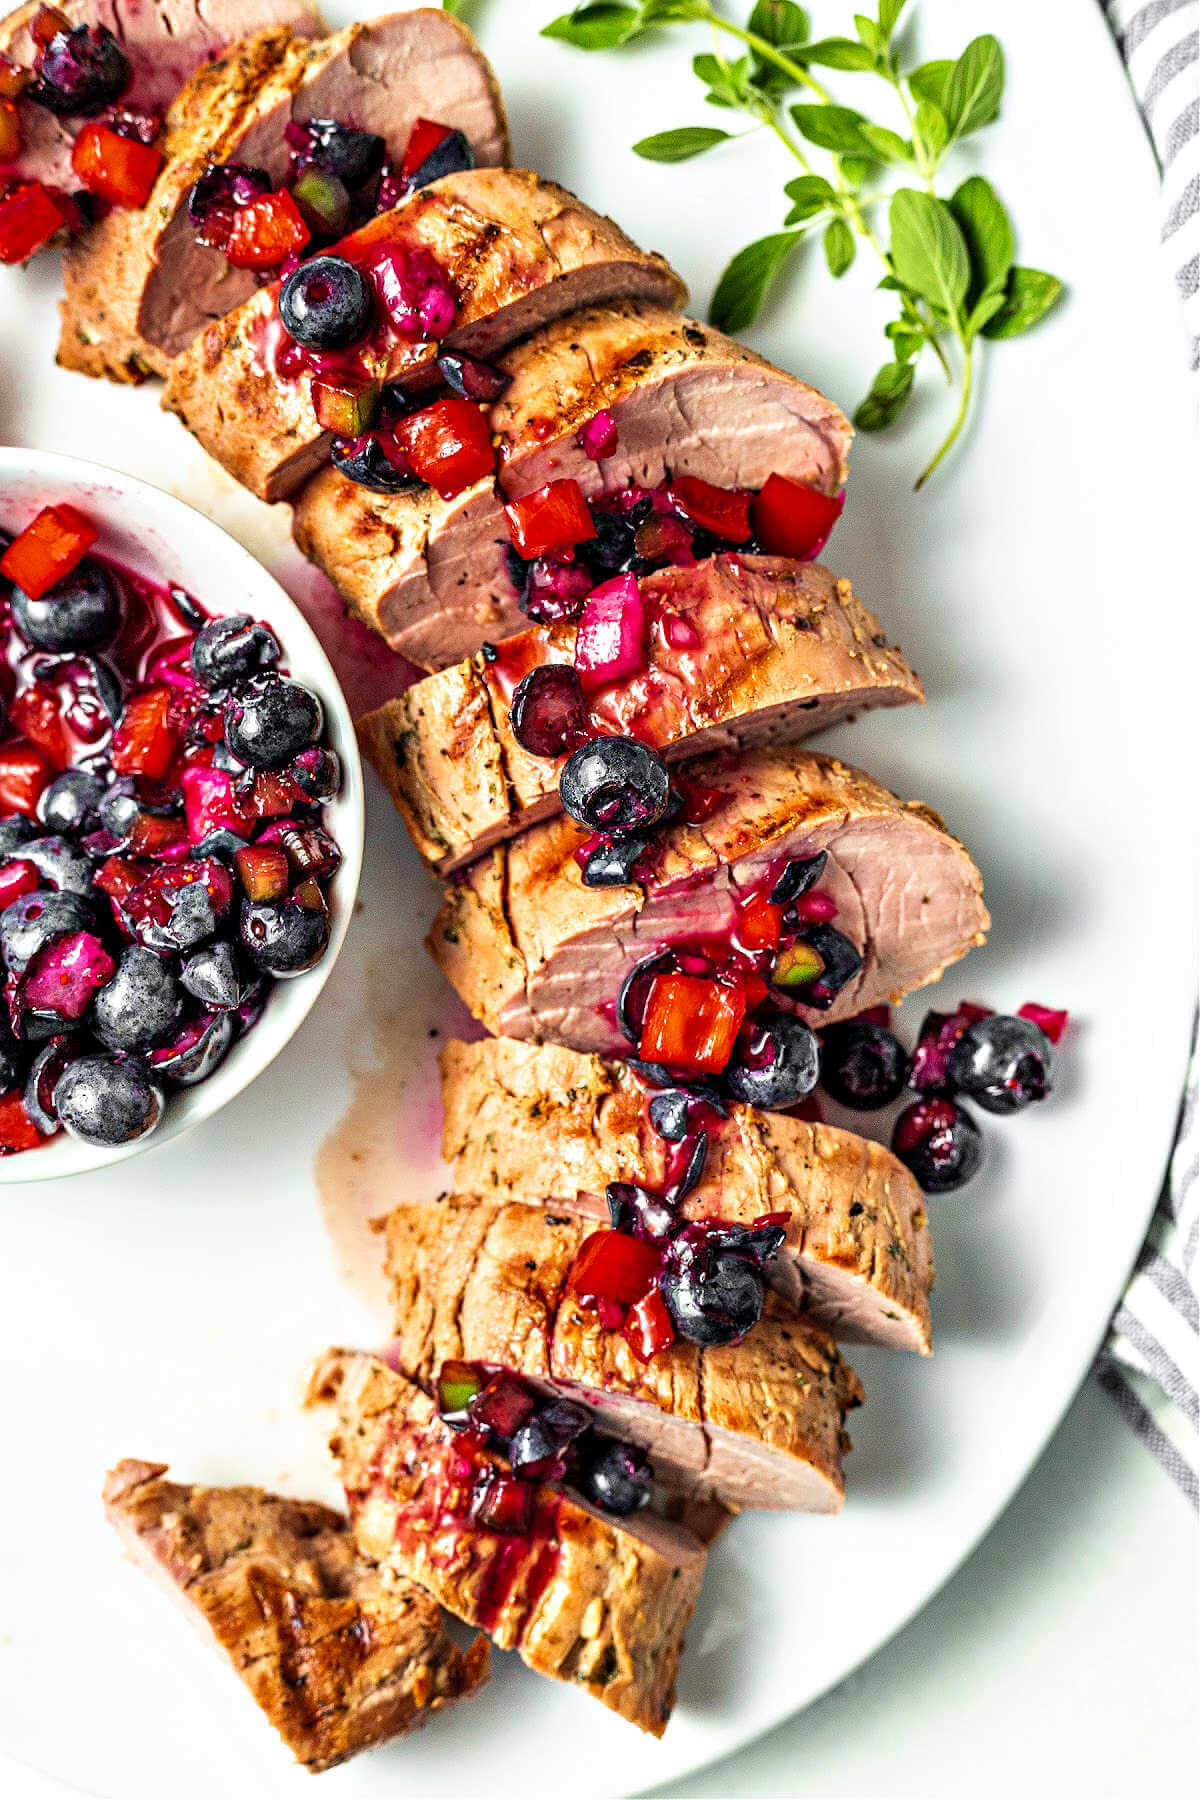 blueberry salsa drizzled over slices of grilled pork tenderloin on a platter.